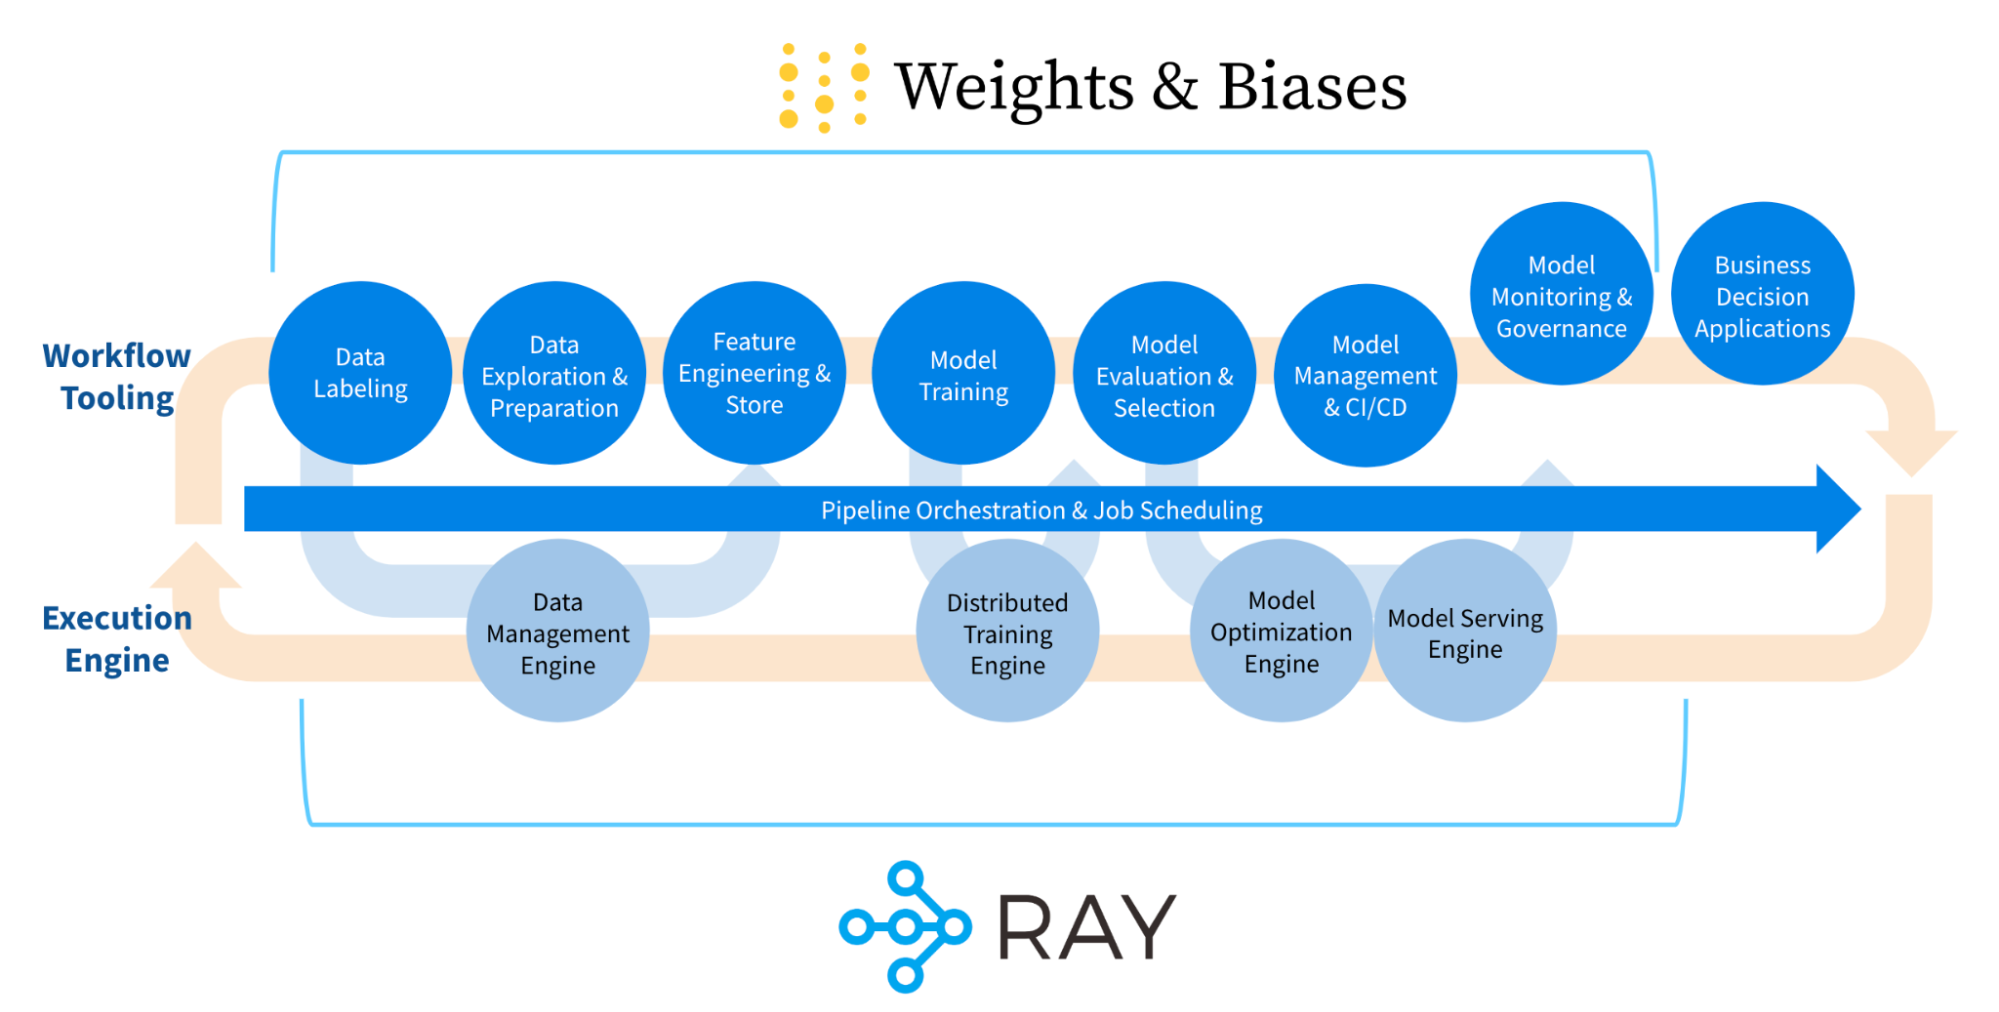 How Weights & Biases and Ray work together